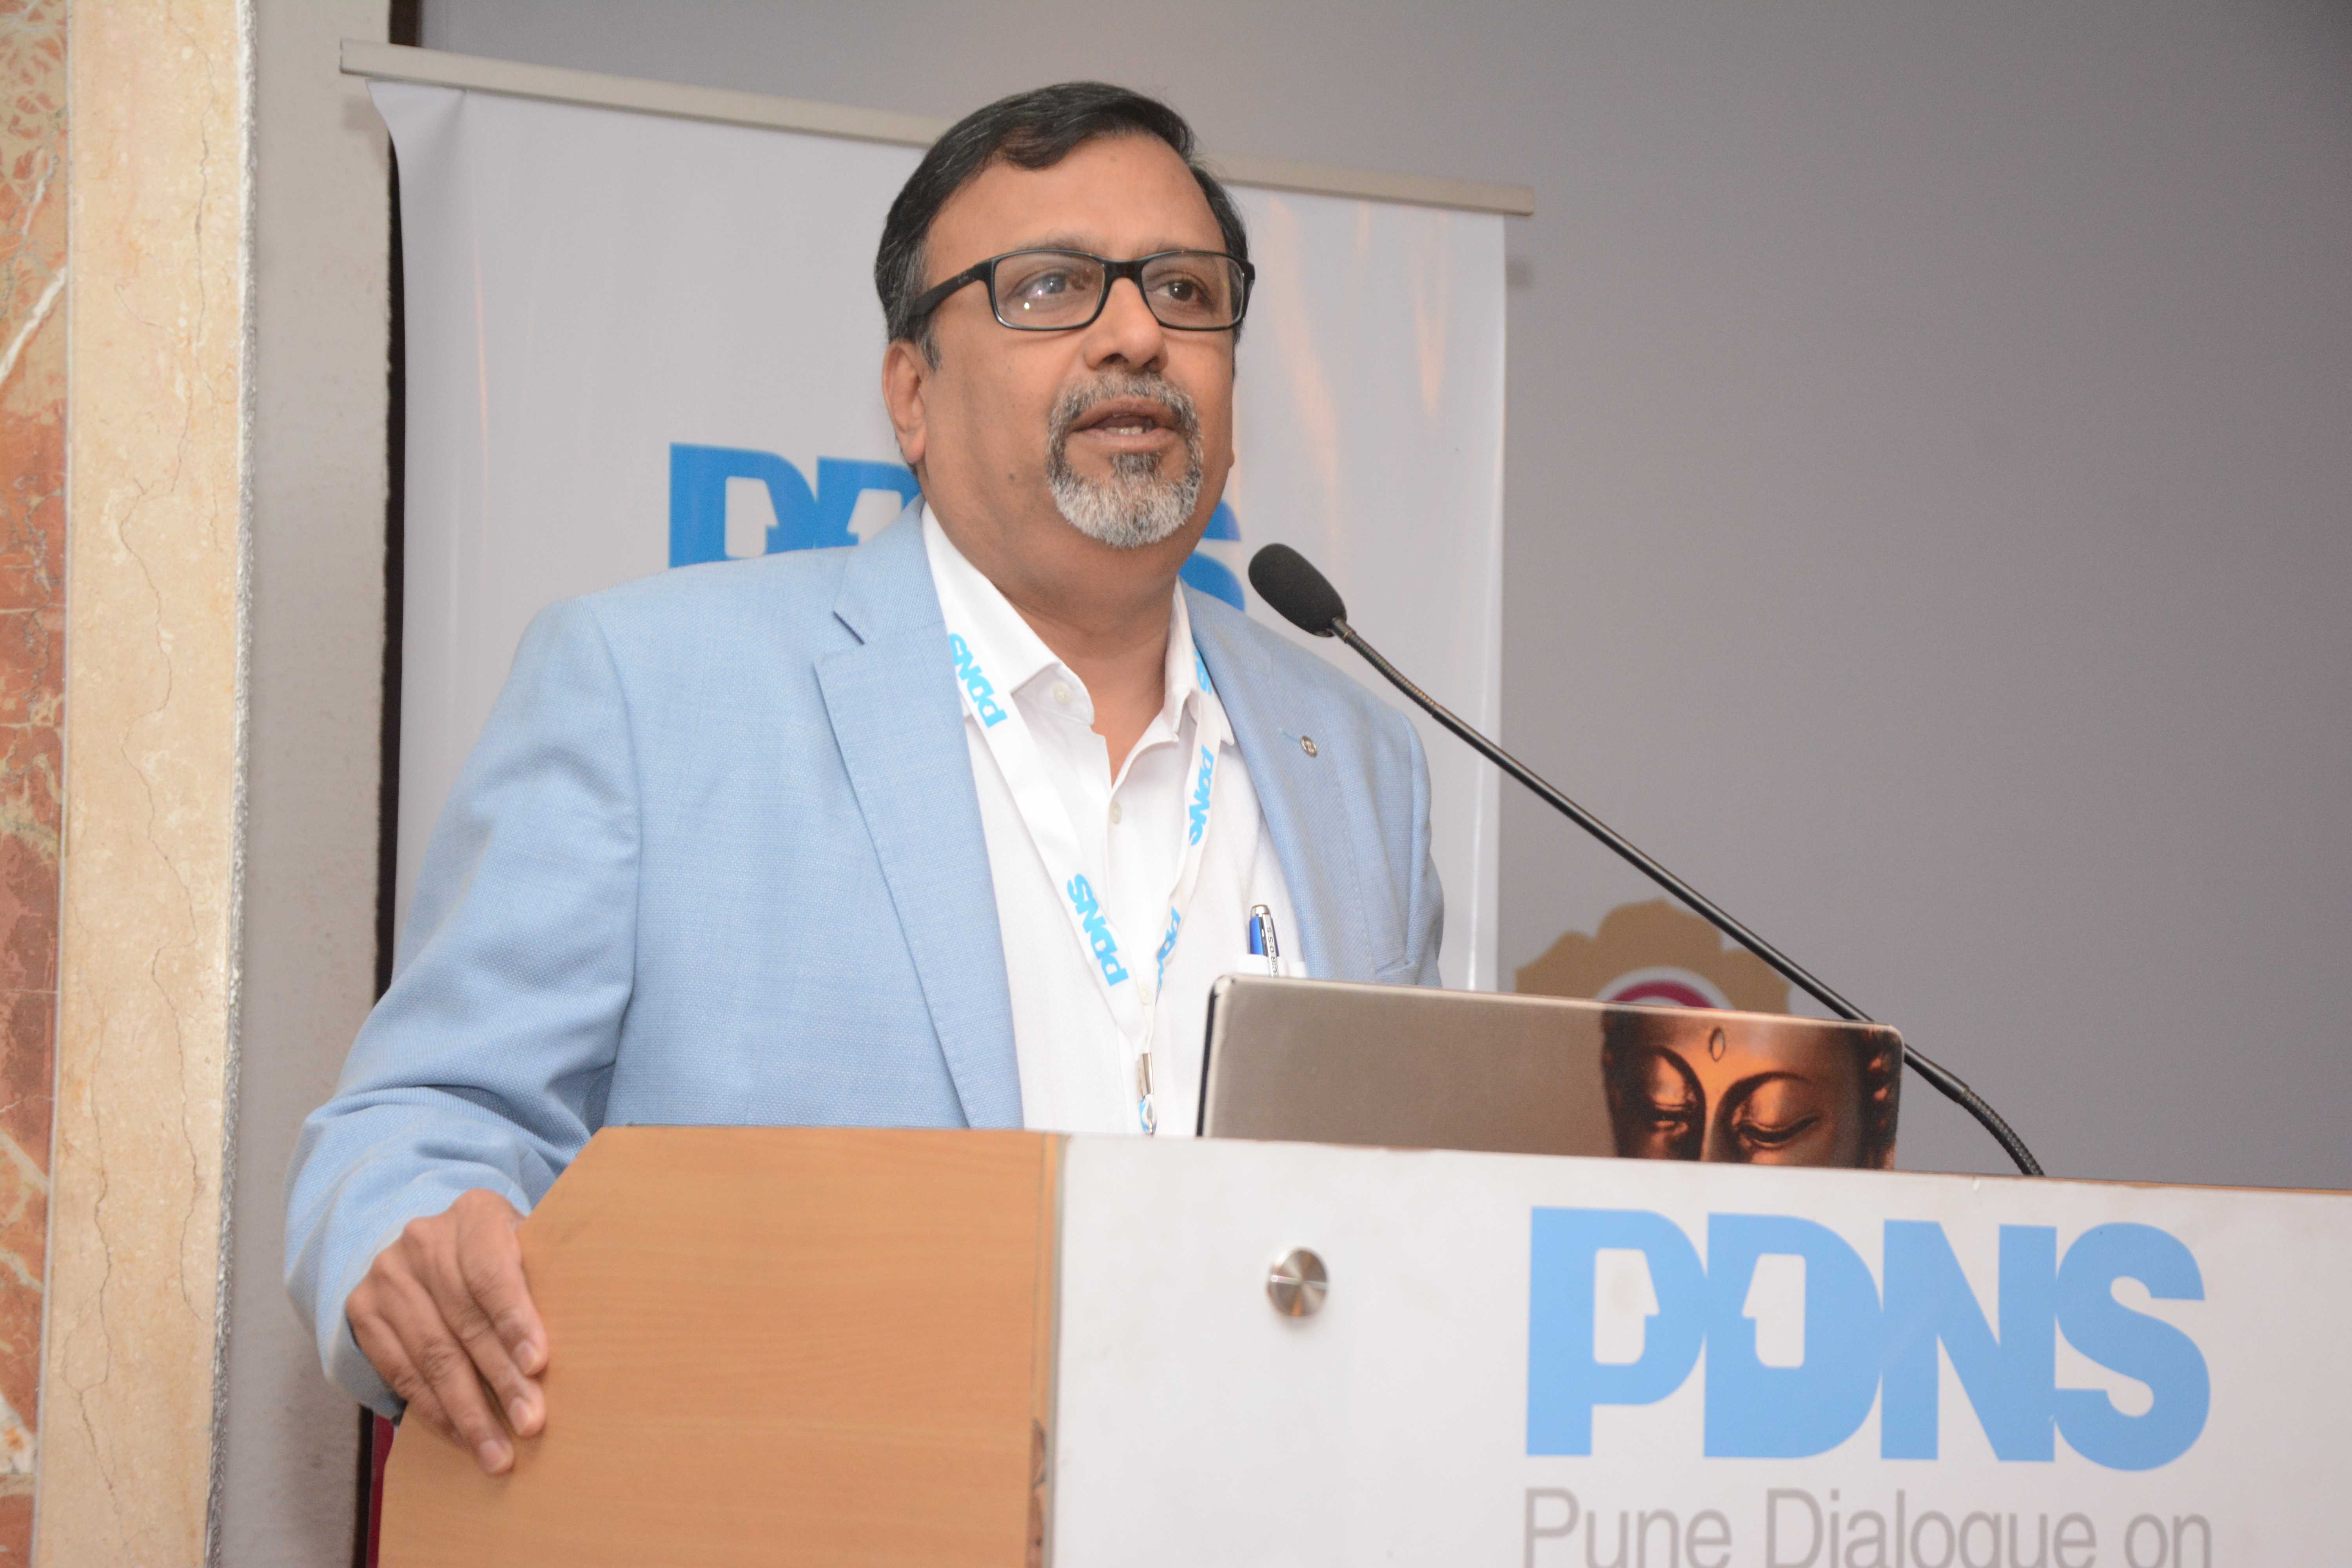 Mangesh Kirtane Change Management at PDNS by PIC October 2018 2